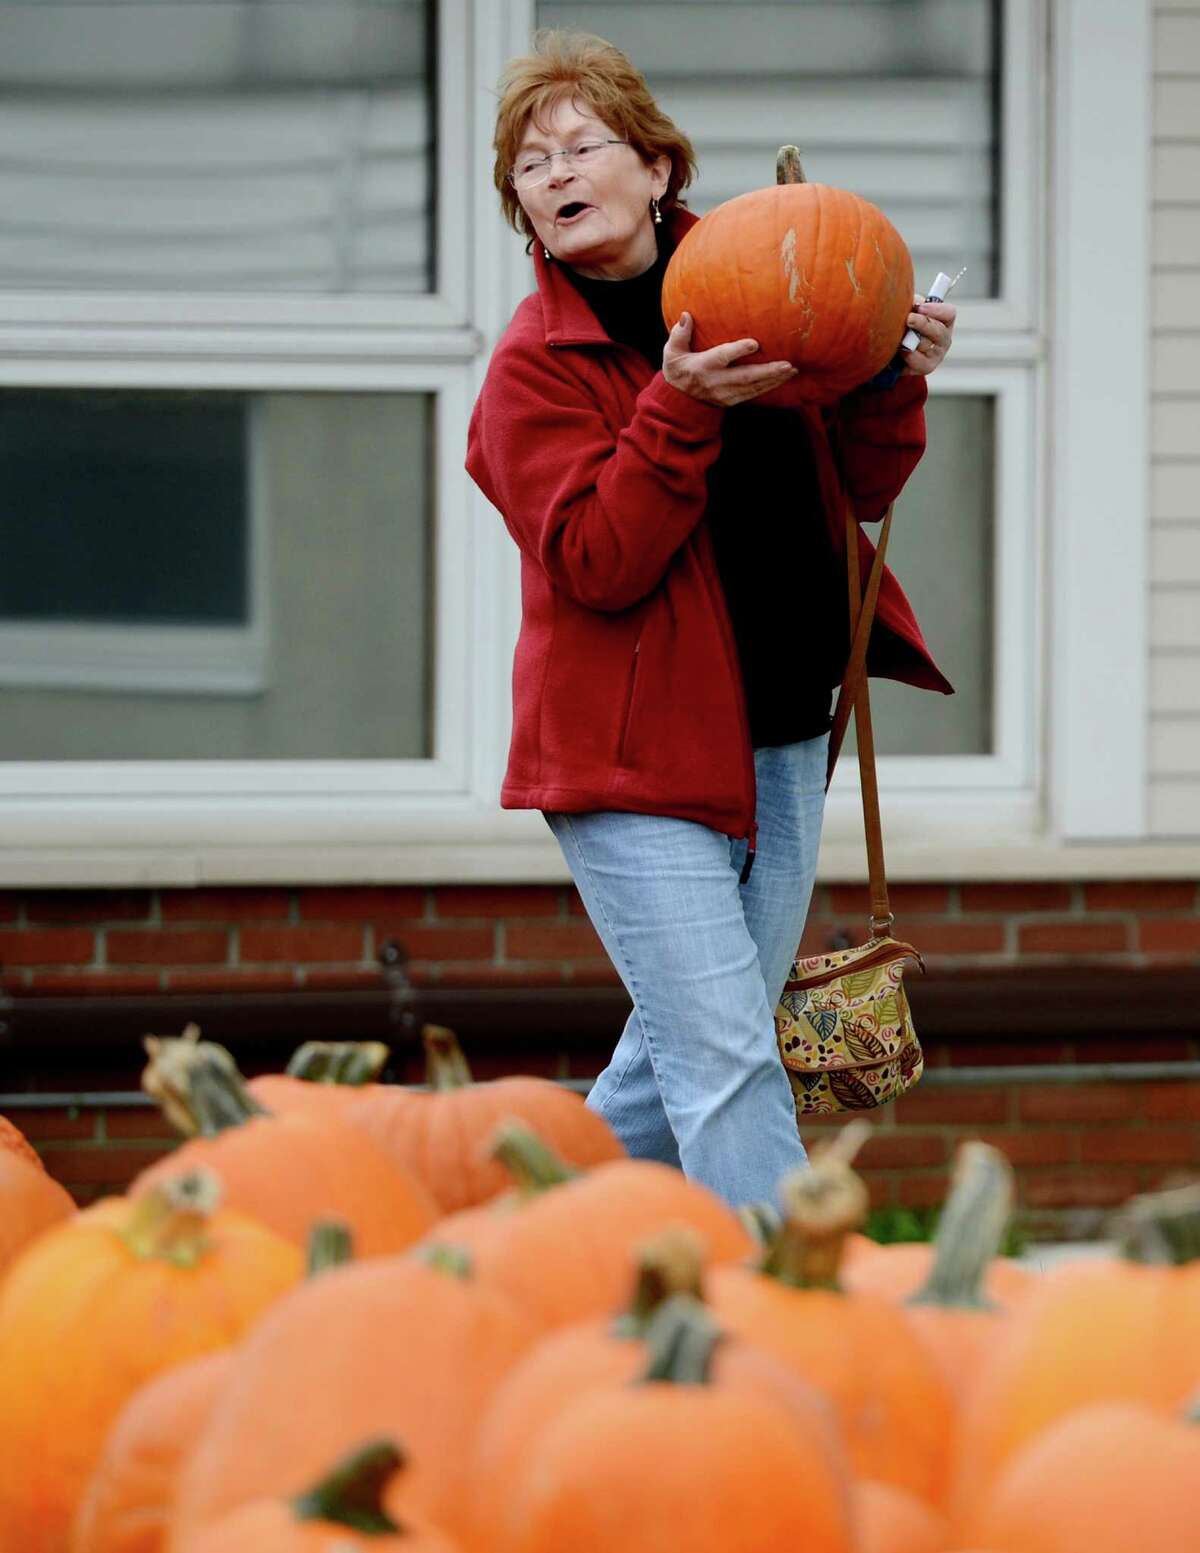 Helen Mooney of Albany carries her pumpkin to the check out at the McKownville Methodist Church in Albany, N.Y. October 1, 2012. Profits from the sale of the pumpkins support the mission scholarships at the church. (Skip Dickstein/Times Union)